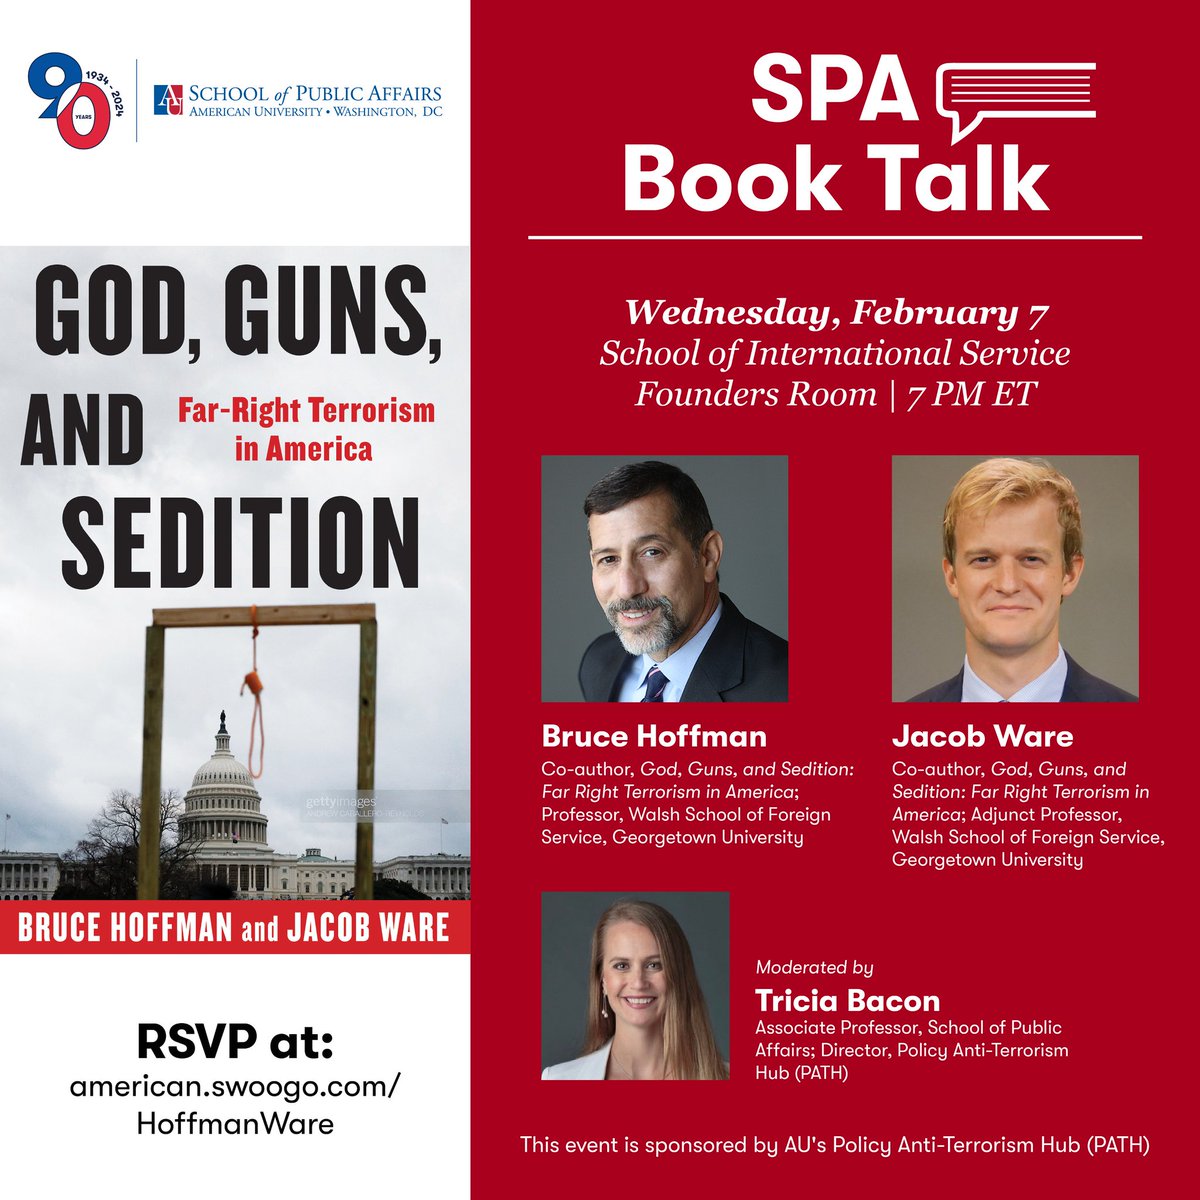 Join SPA on Wed., Feb. 7 at 7 p.m. as Prof. @tricbacon hosts a conversation with authors @hoffman_bruce and @Jacob_A_Ware about their thought-provoking book 'God, Guns, and Sedition.' RSVP: bit.ly/3OiEvto #BookTalk